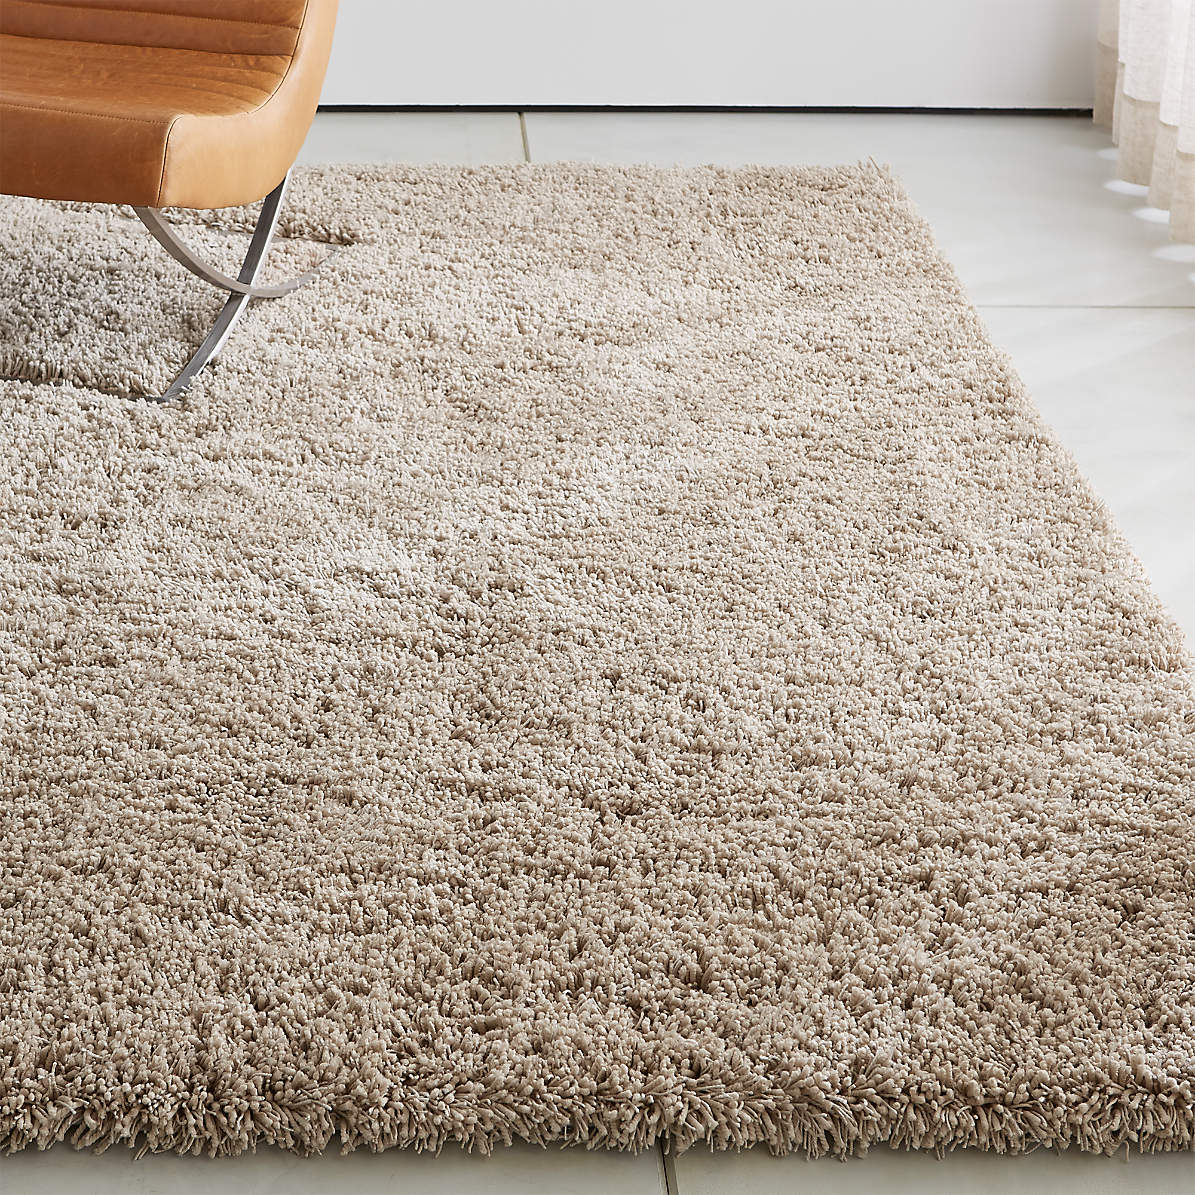 Memphis Stone Natural Rug Crate, Crate And Barrel Area Rugs